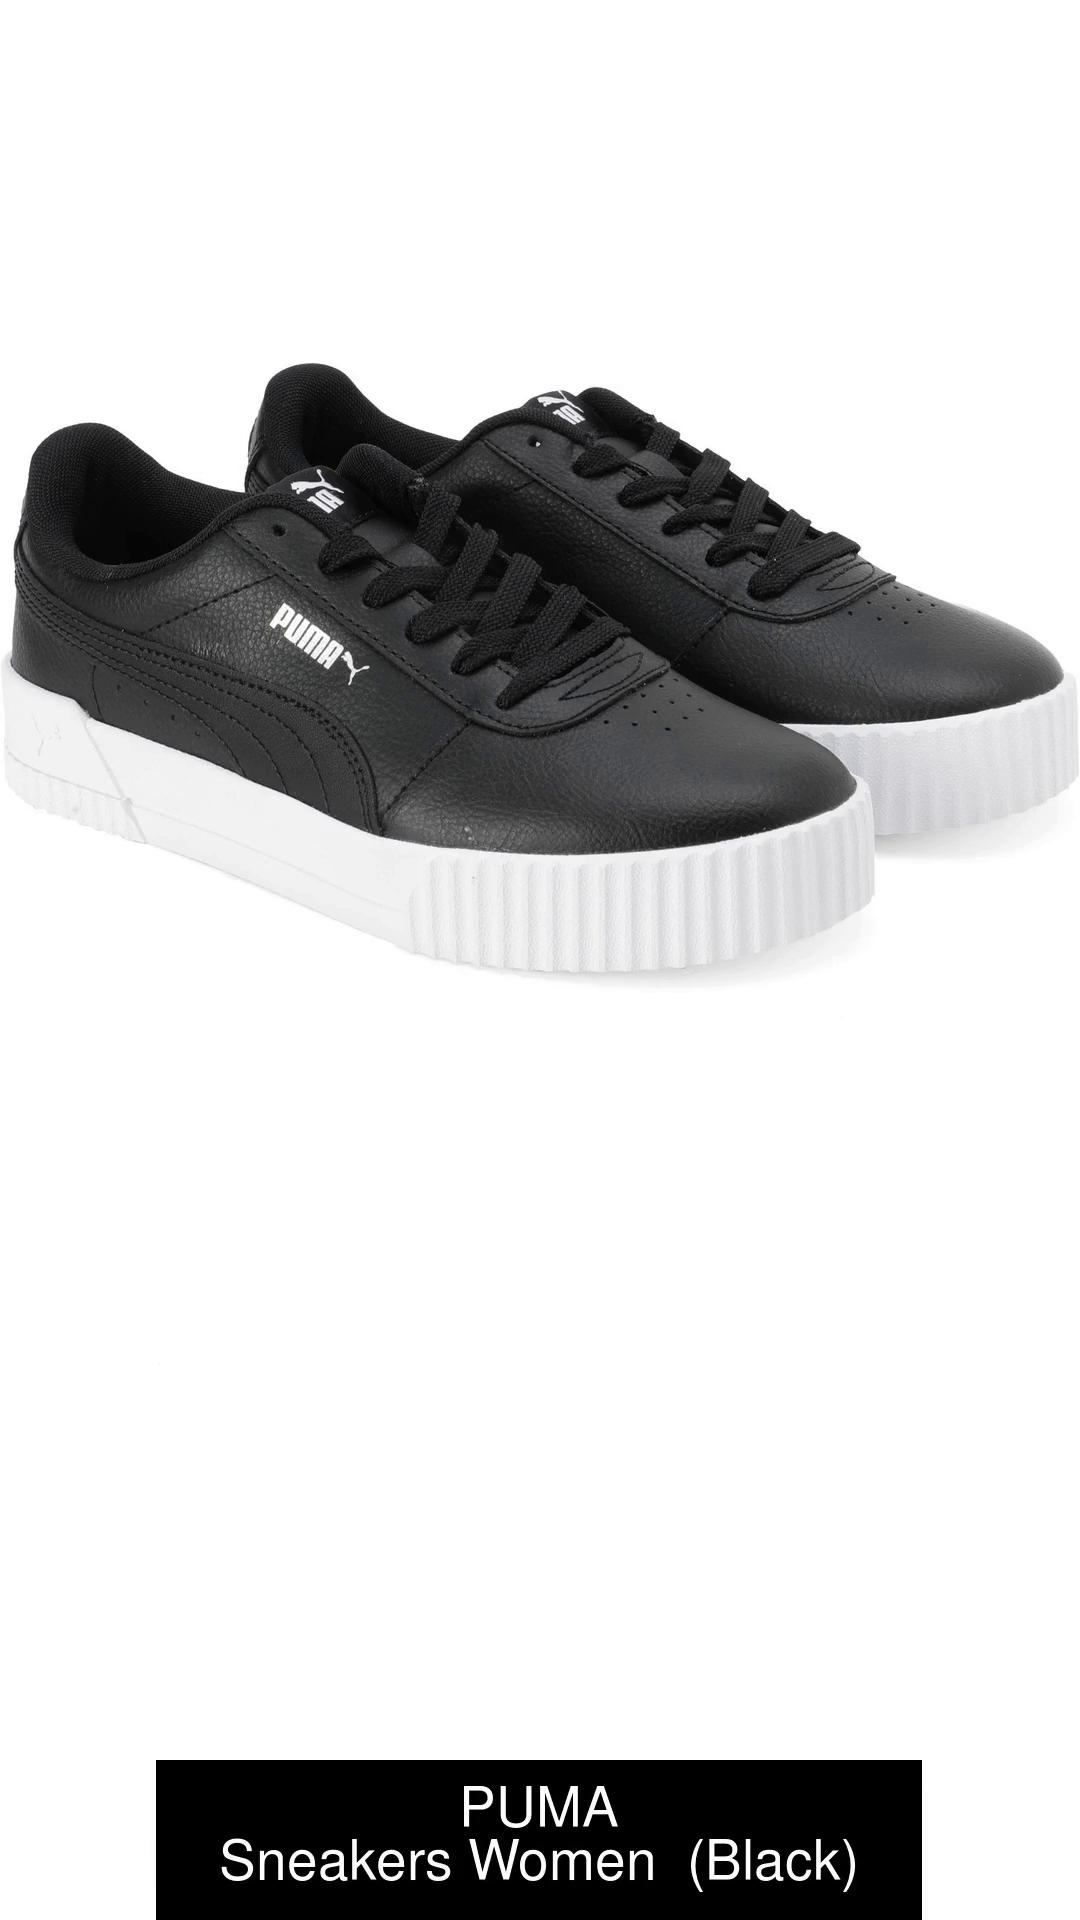 PUMA Carina L Online For India Price Sneakers Buy Sneakers Best PUMA - Carina For Women Shop for at in - Women Online Footwears L